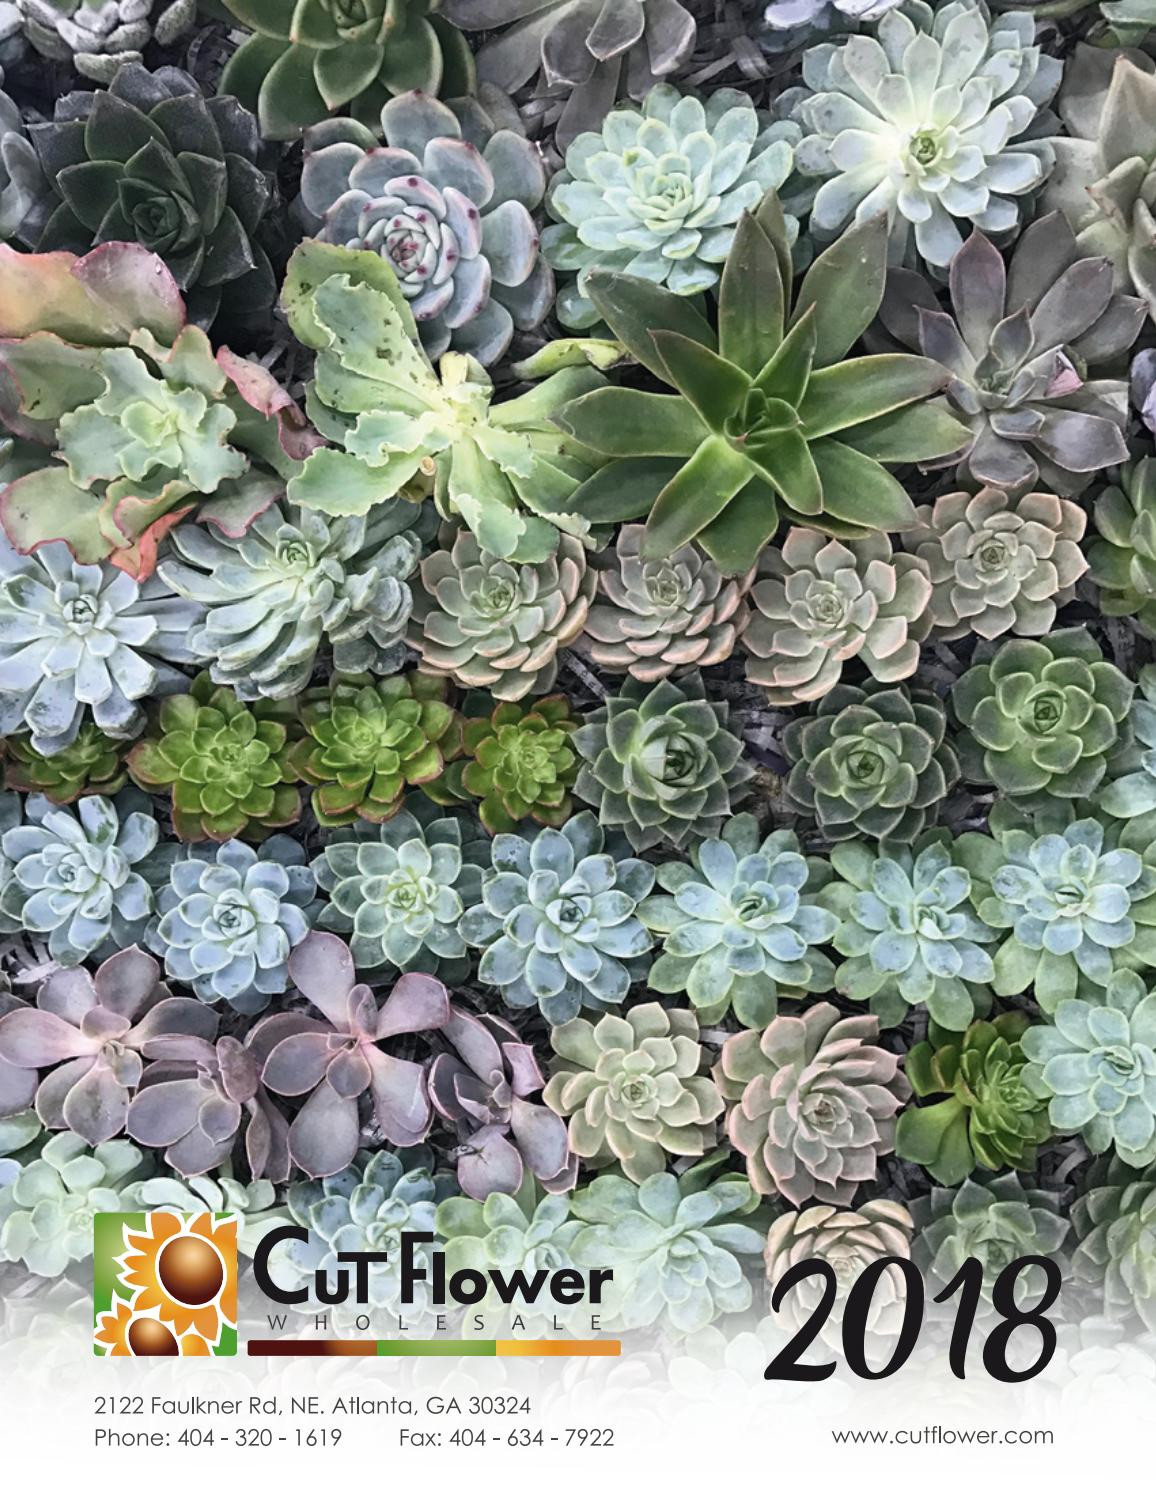 21 Fashionable 20 Trumpet Vase wholesale 2024 free download 20 trumpet vase wholesale of 2018 cut flower wholesale catalog by cut flower wholesale inc issuu pertaining to page 1